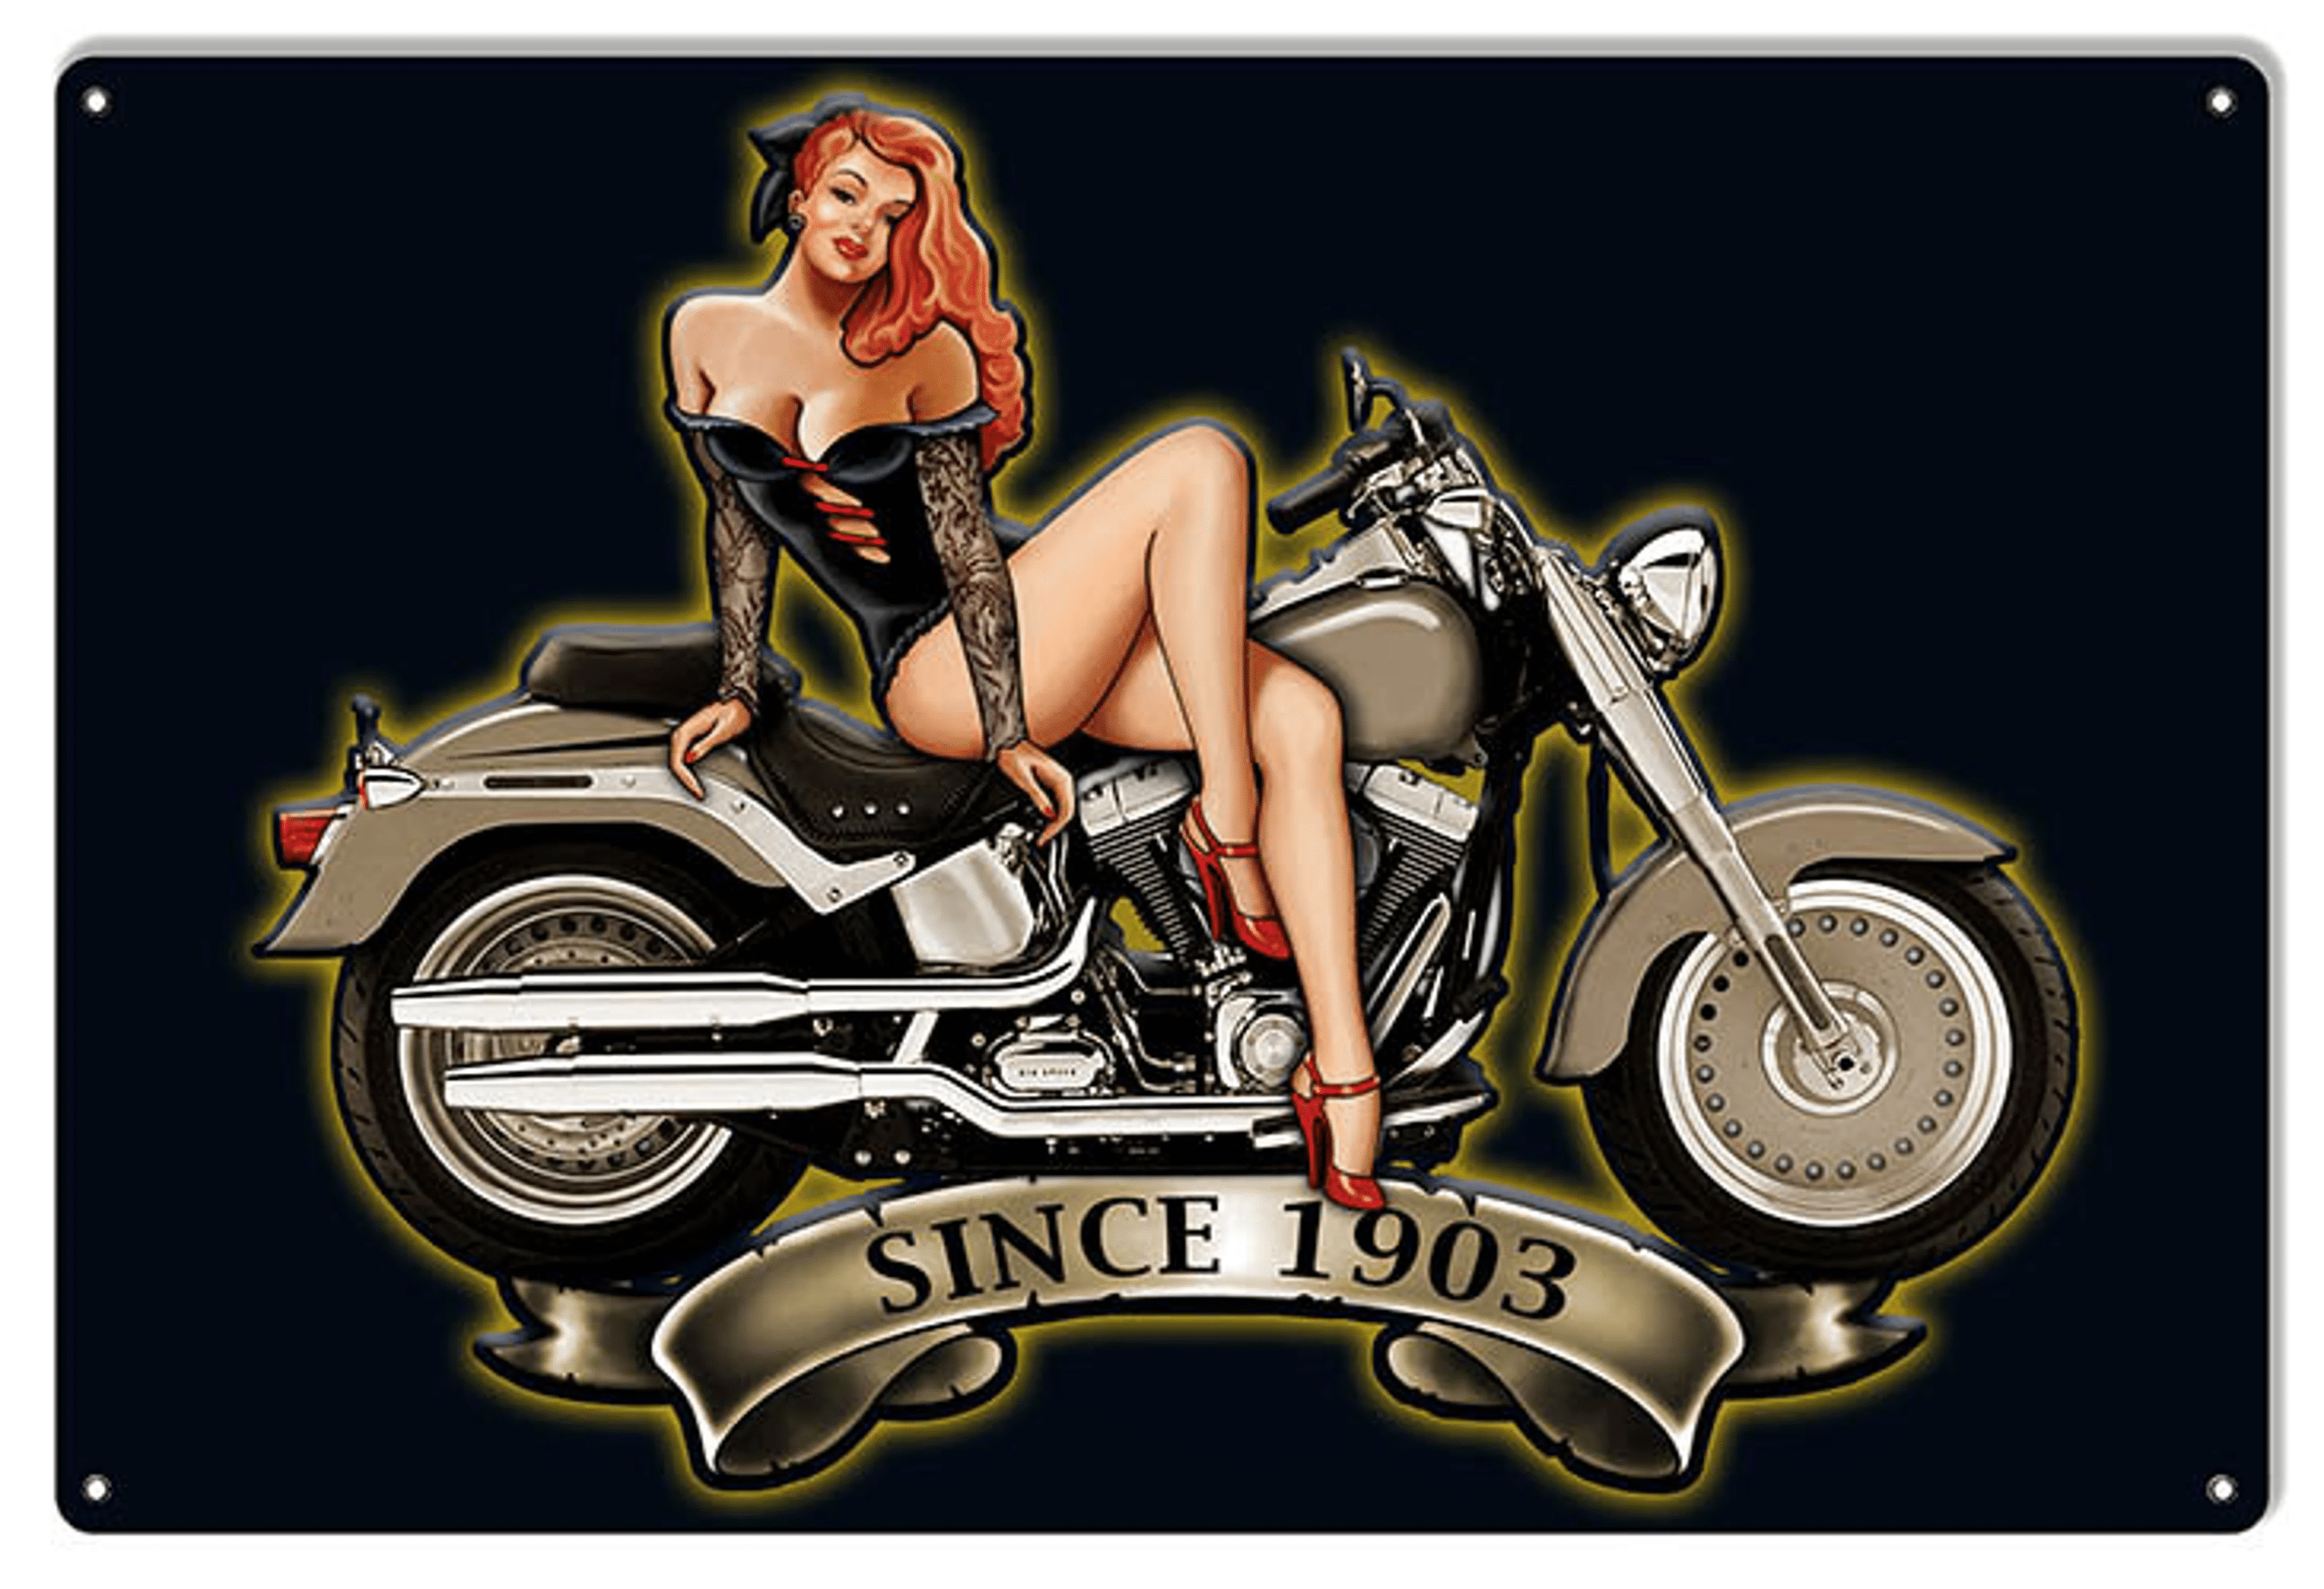 Pin Up Girl Motorcycle 1903 Series  Metal sign OR 16 x 12 Canvas Art home decor wall art sm